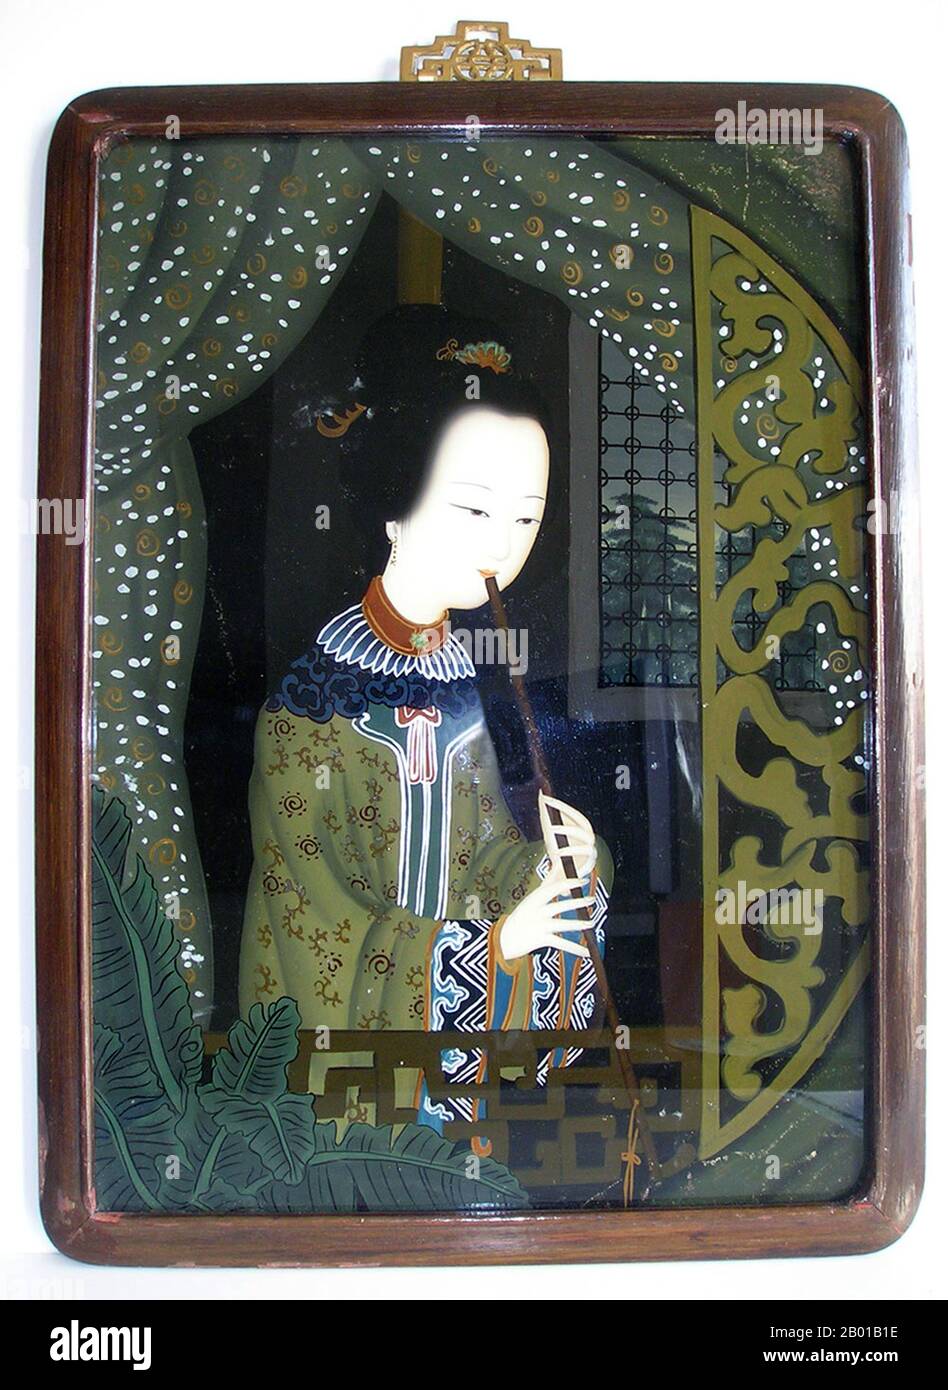 China: Mirror painting of a woman playing a flute, late Qing Dynasty, c. 1840-1860.  Reverse painting on glass is an art form consisting of applying paint to a piece of glass and then viewing the image by turning the glass over and looking through the glass at the image. Stock Photo